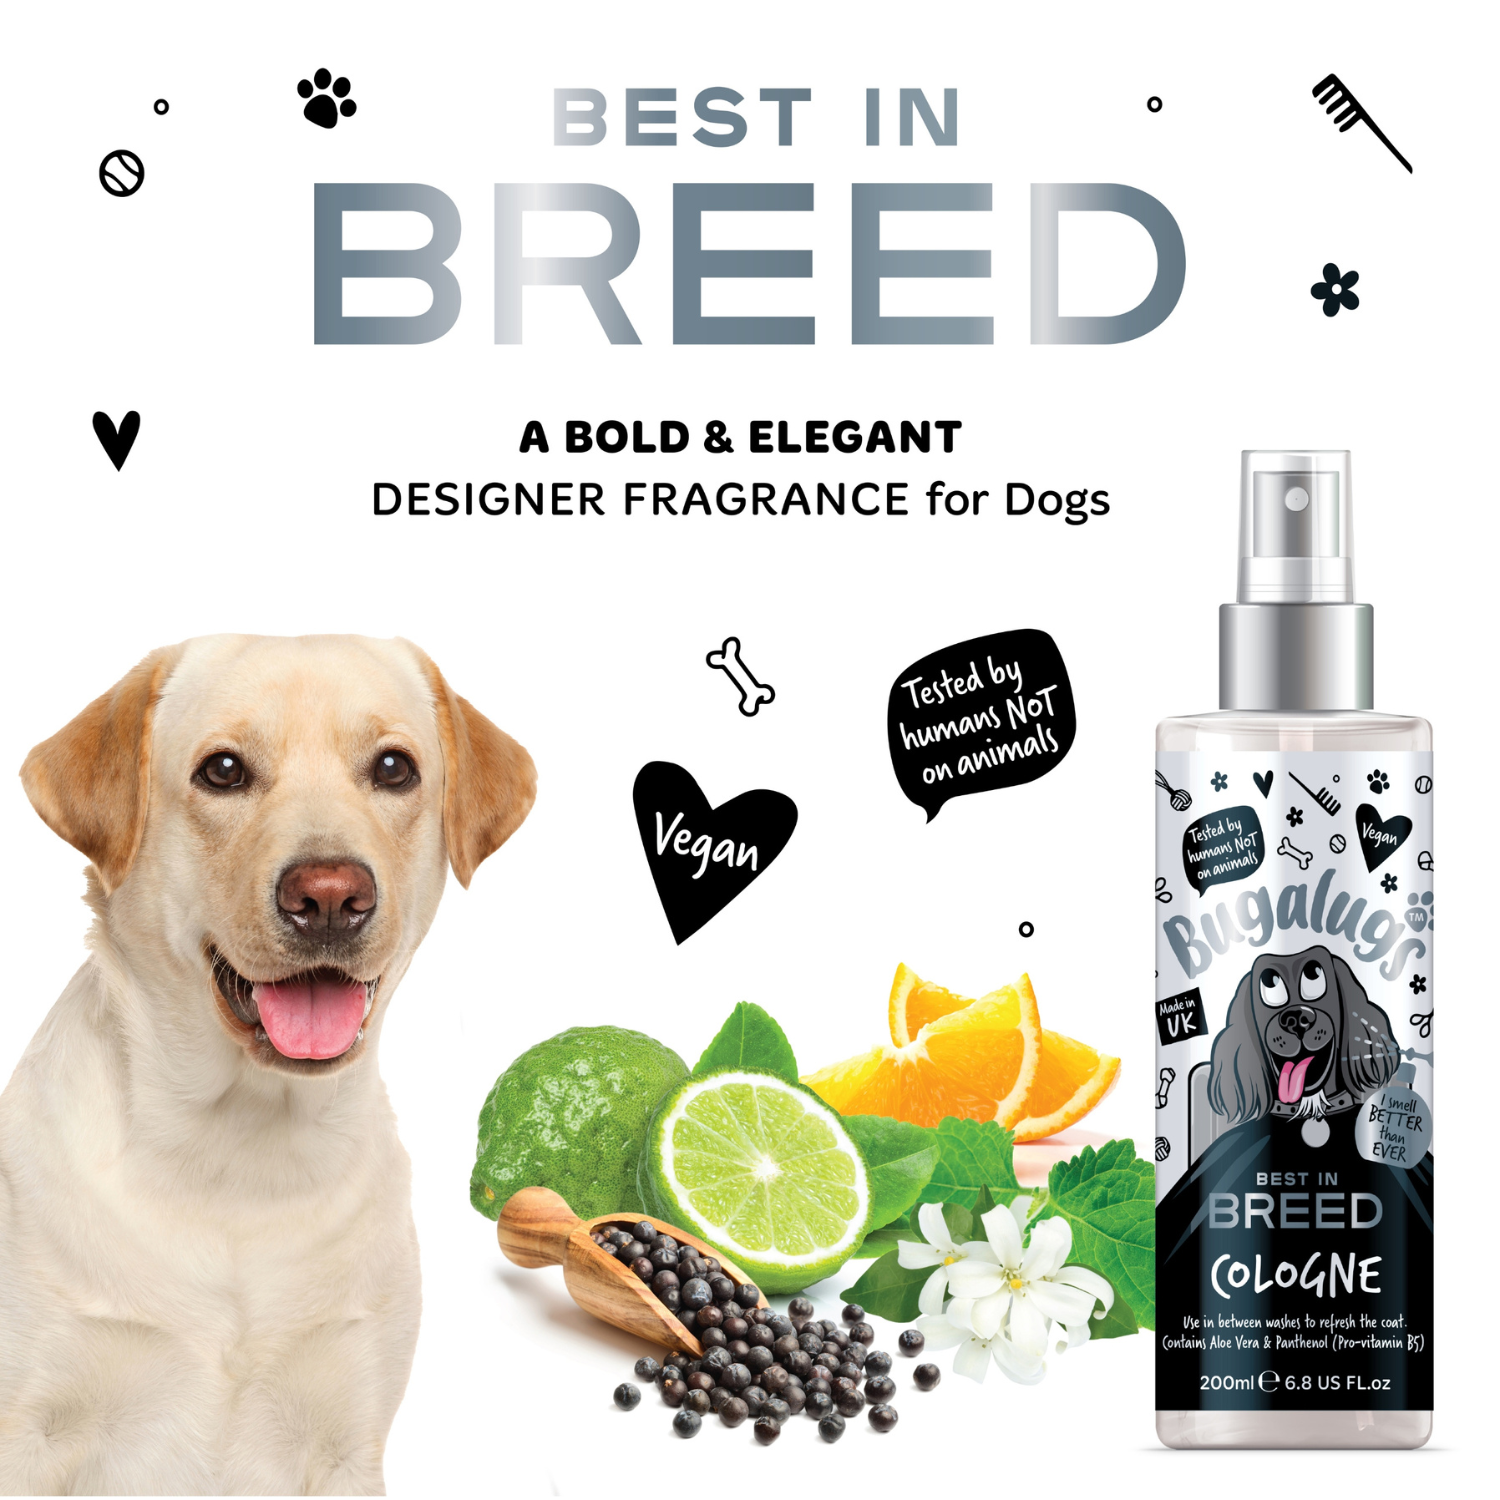 Bugalugs Best in Breed Cologne - A bold and elegant designer fragrance for dogs